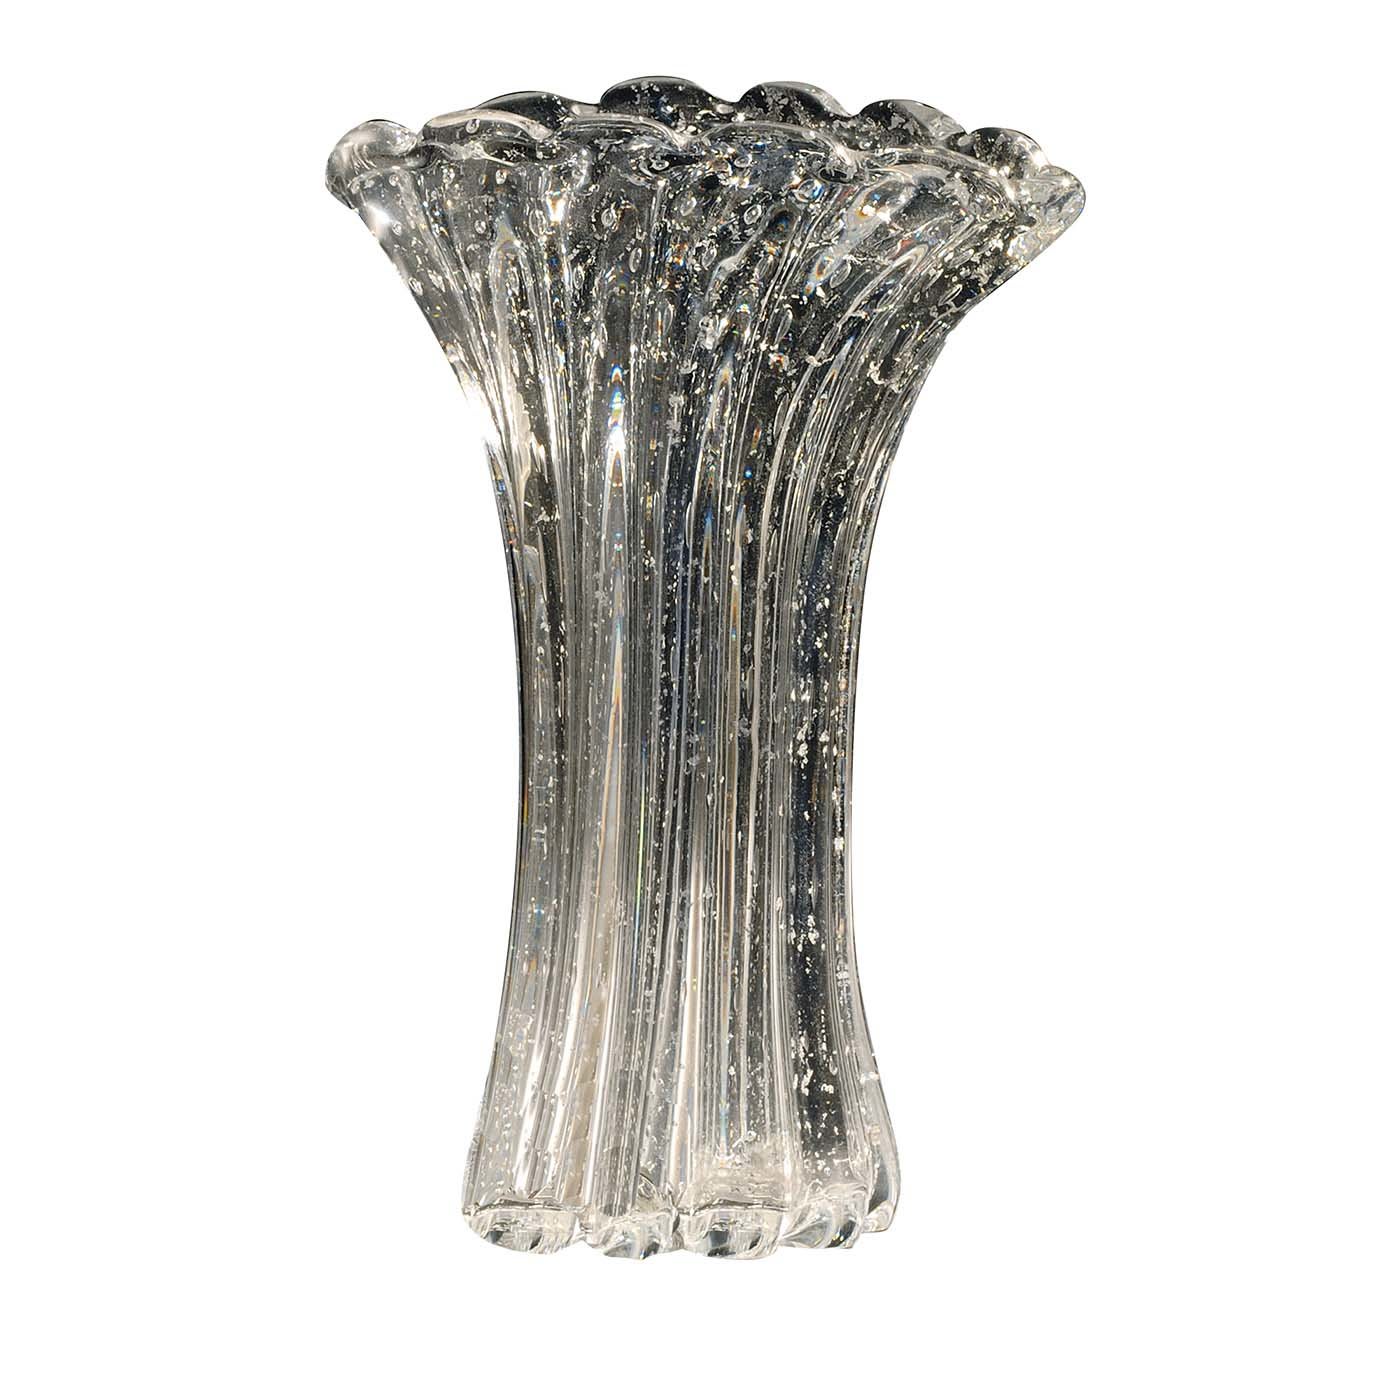 Aureum Small White and Gold Vase - Fornace Mian